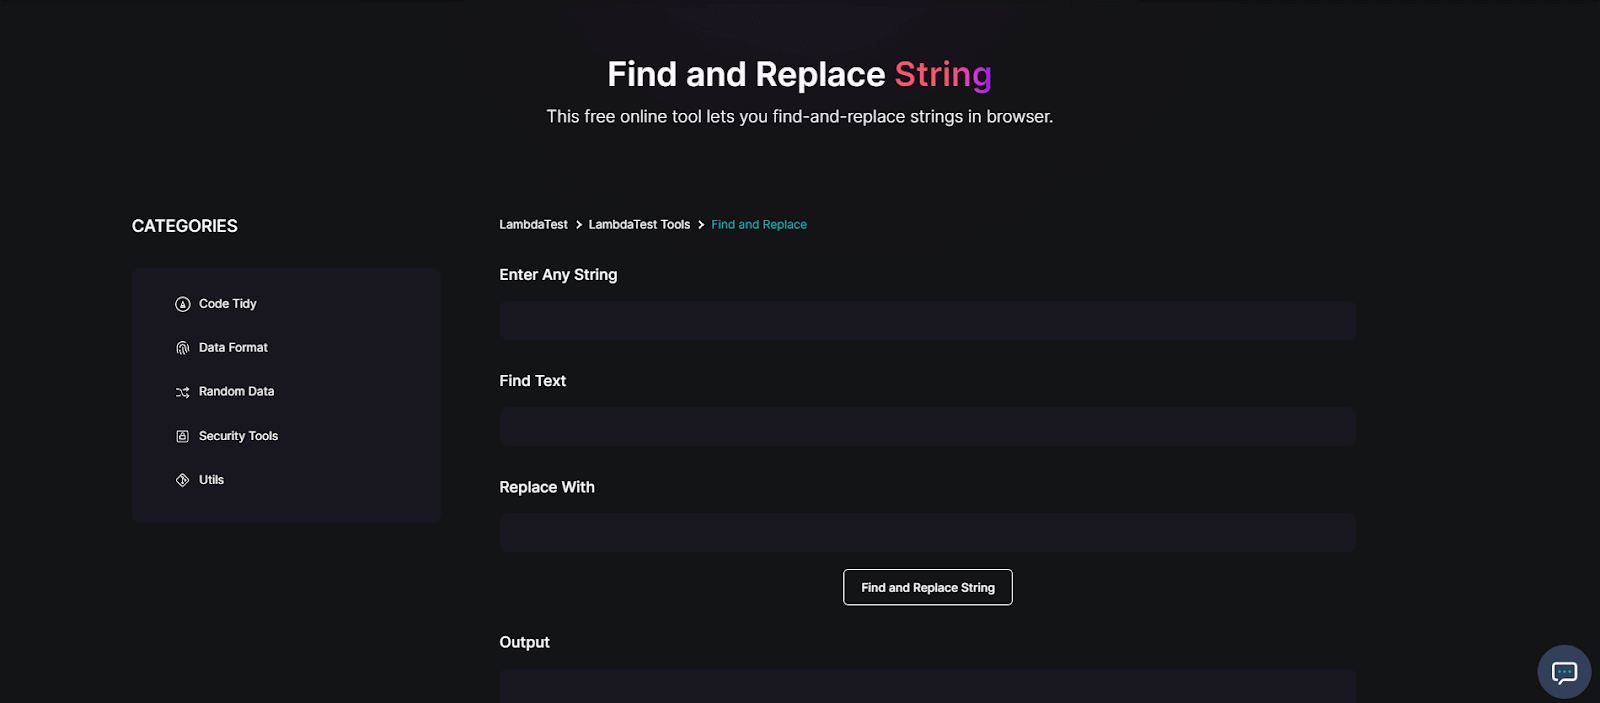 Find and Replace String